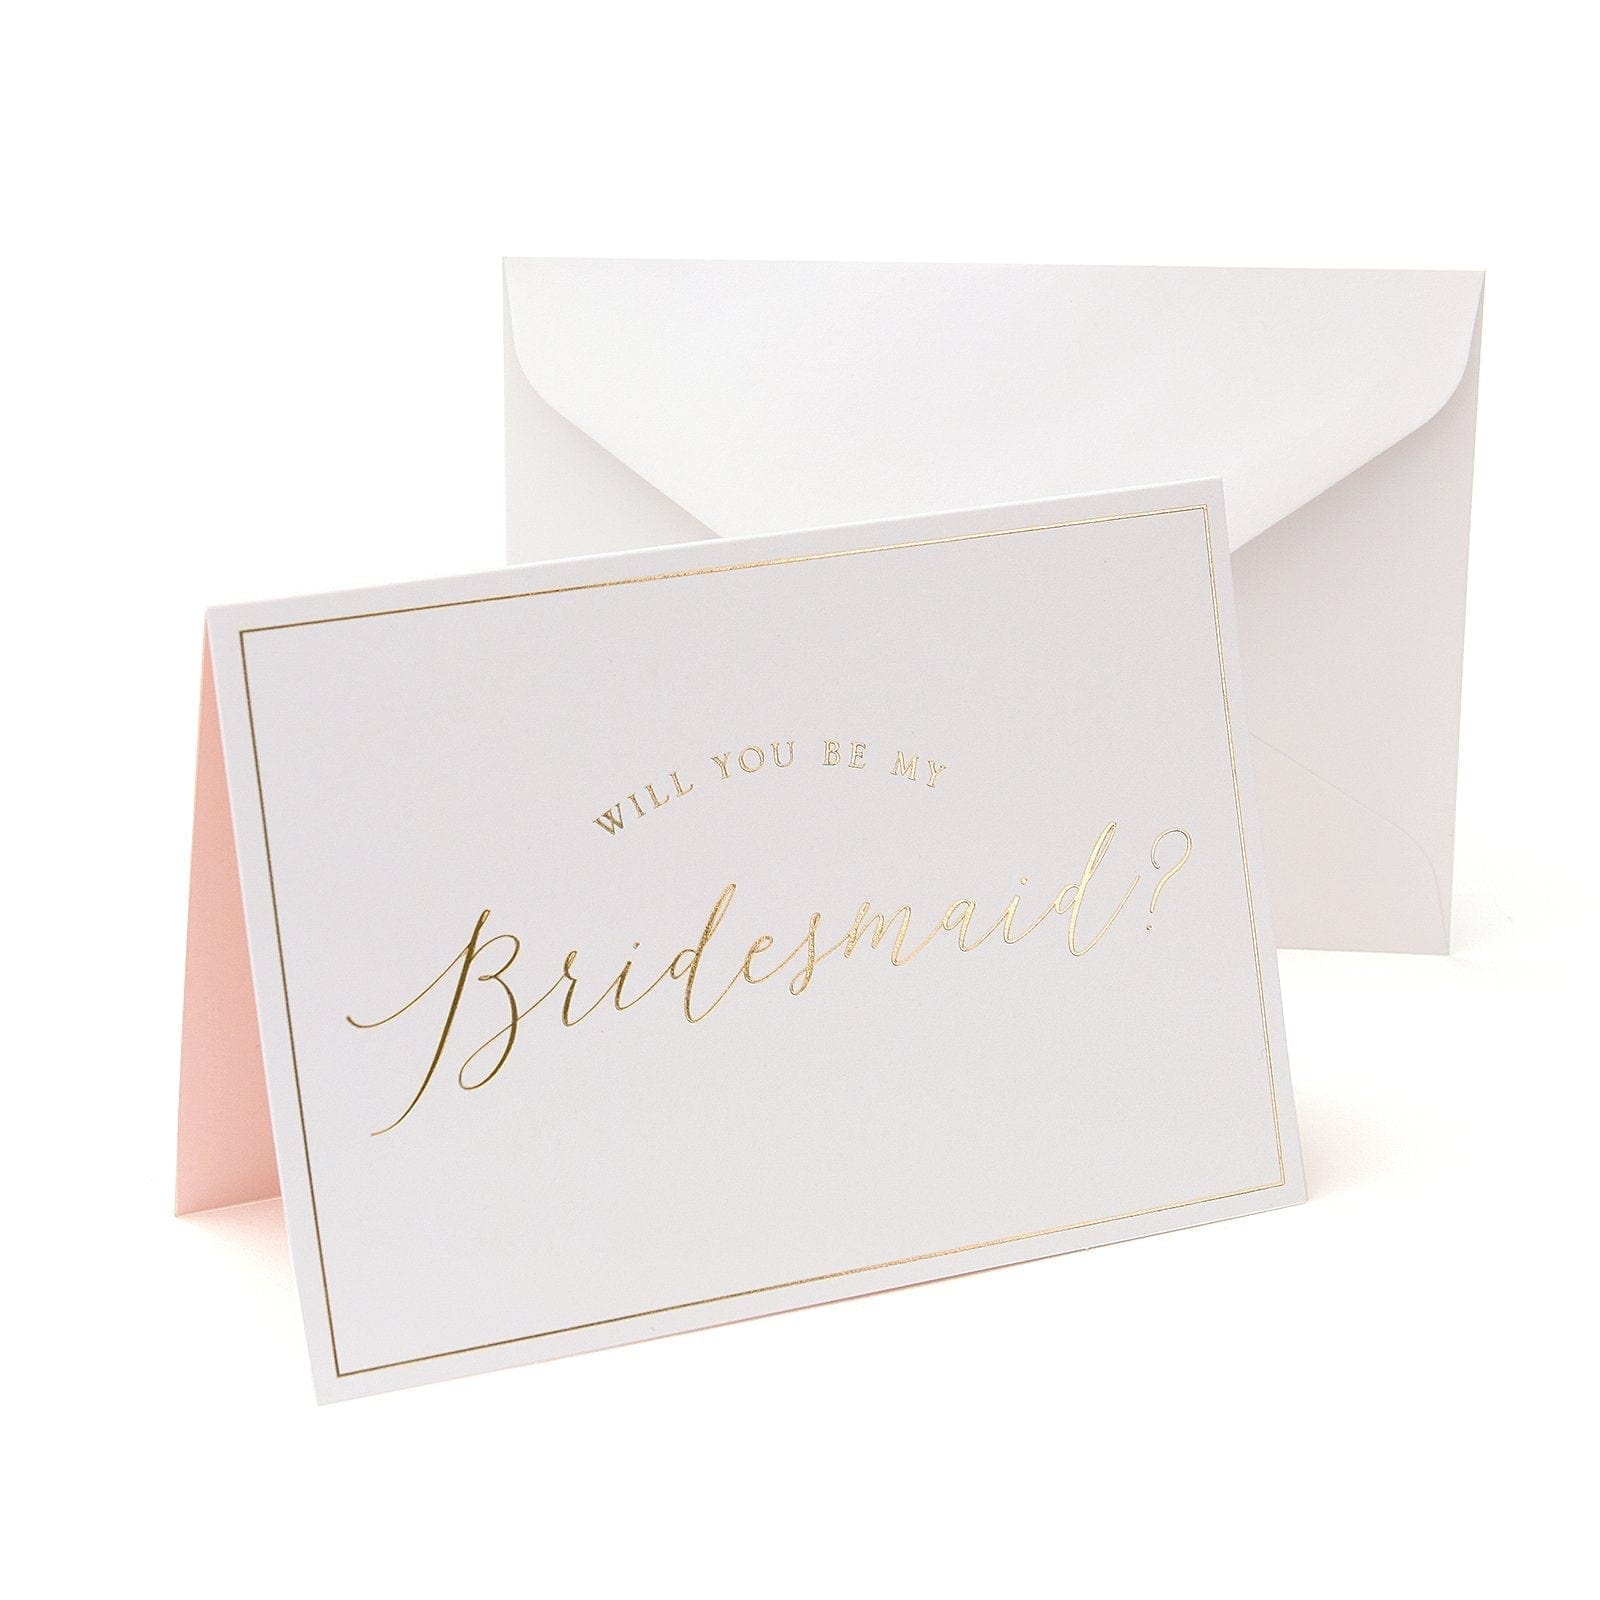 Will You Be My Bridesmaid Cards - 8 Count Gartner Studios Note Cards 34932